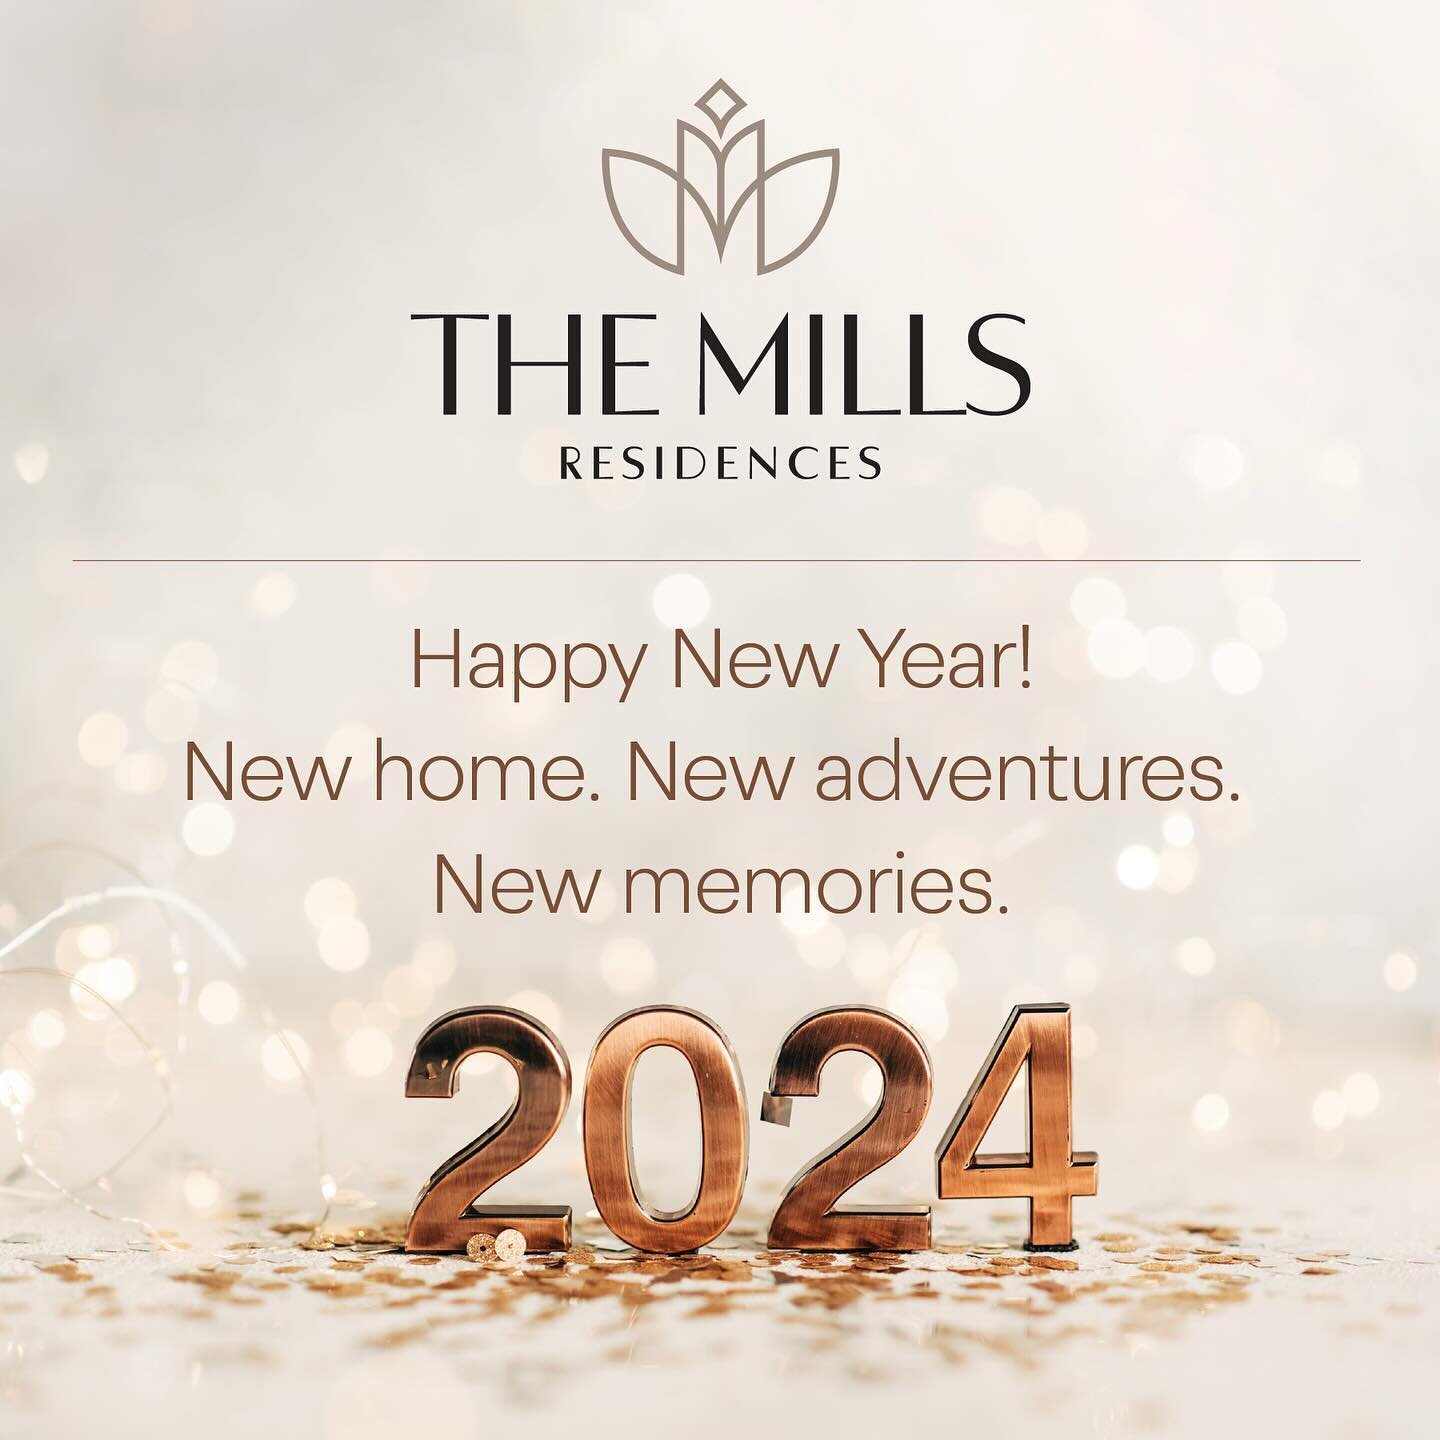 We are ringing in the New Year with the opening of our Leasing Centre at the corner of Queen &amp; Spring Garden Road. Elevate your living experience in 2024. Inquire now at info@themillshfx.ca or call 902-446-1470. #happynewyear #halifaxapartments #